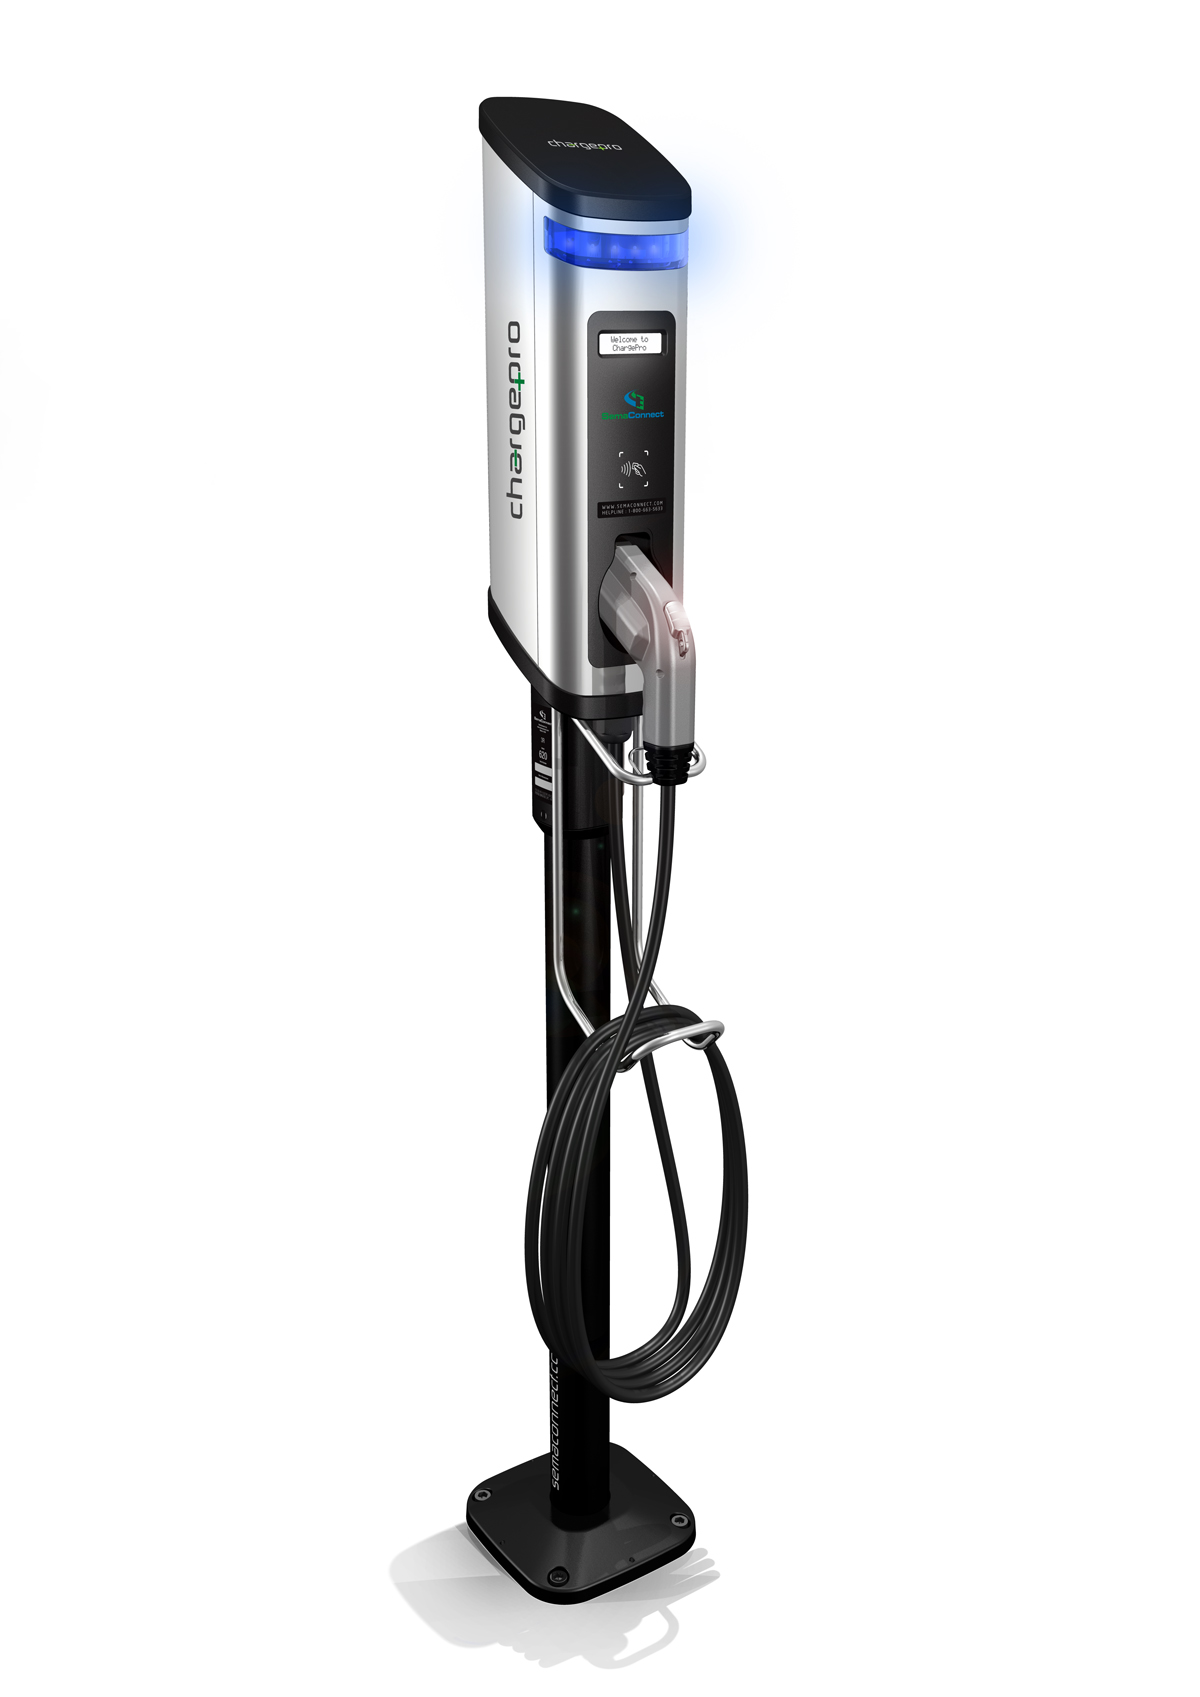 SemaConnect's ChargePro Electric Vehicle Charging Station